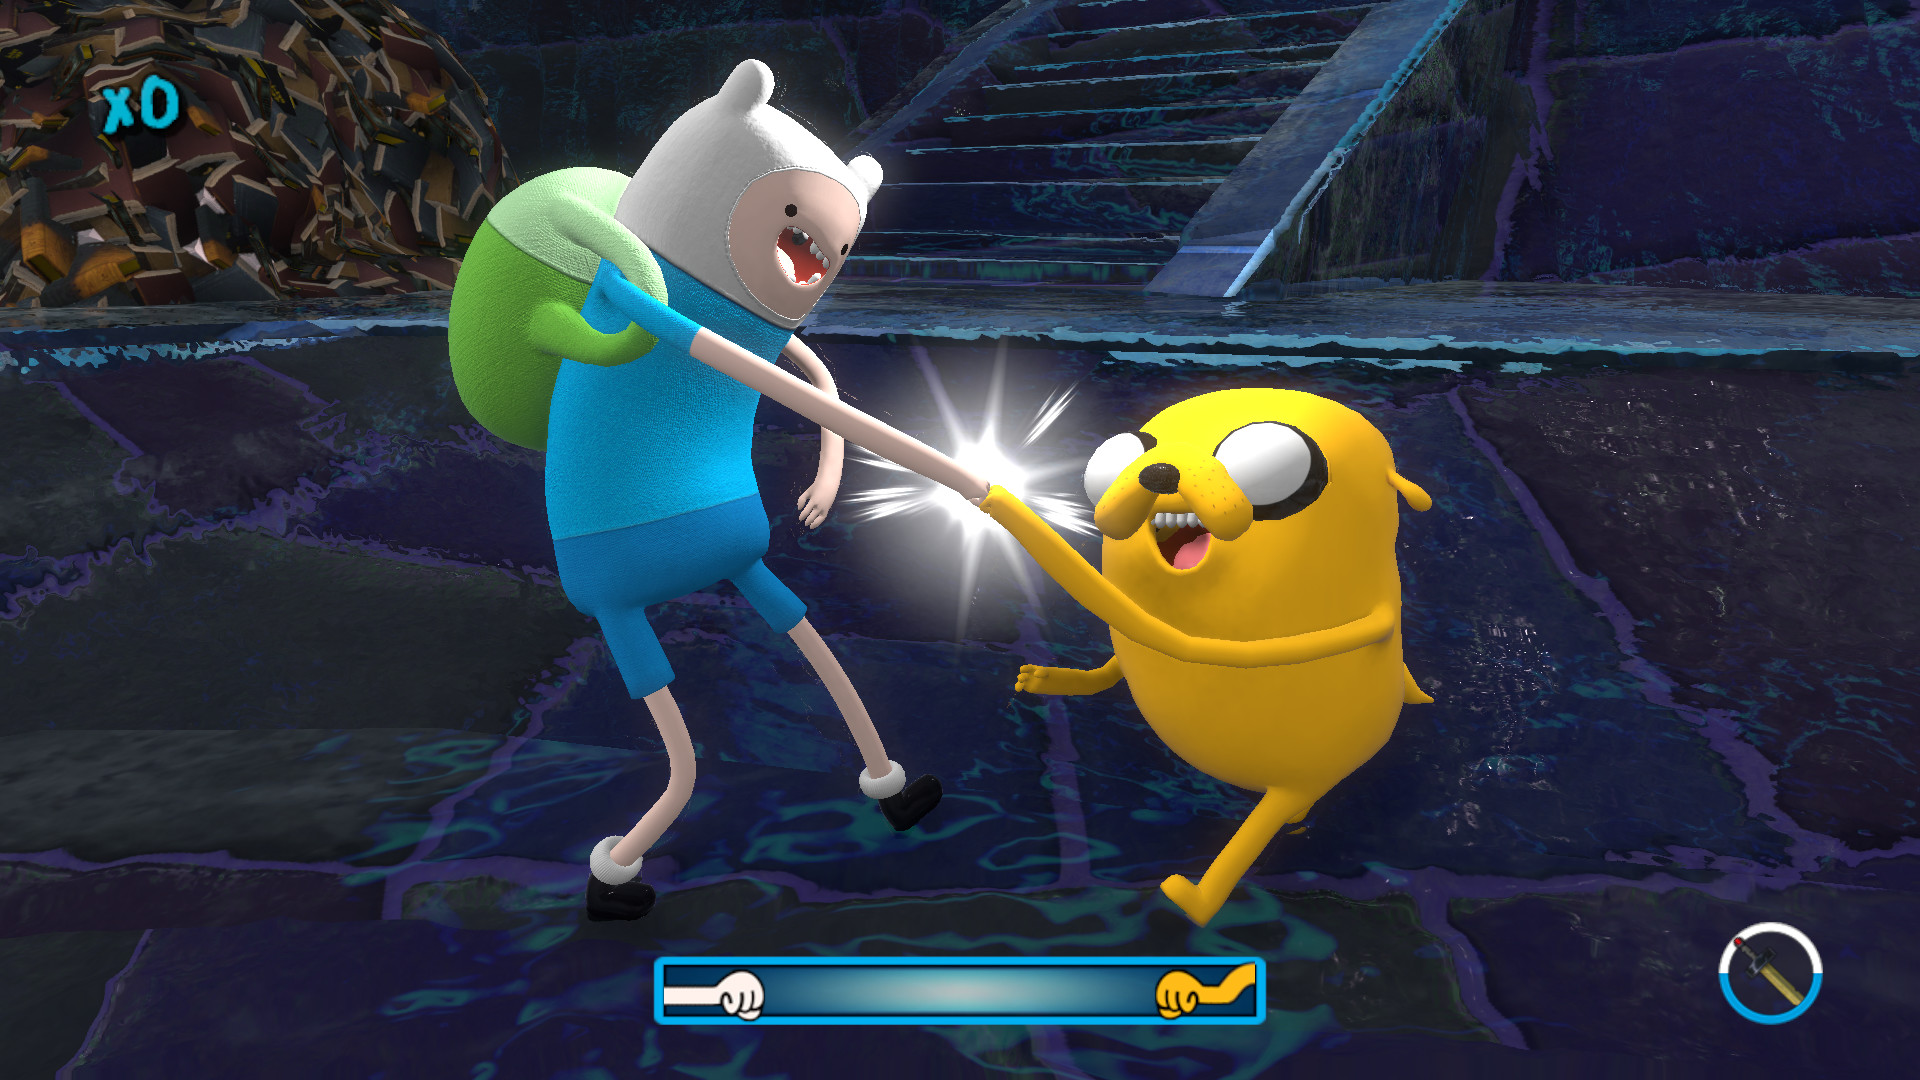 Download Adventure Time Finn And Jake Investigations Full Pc Game